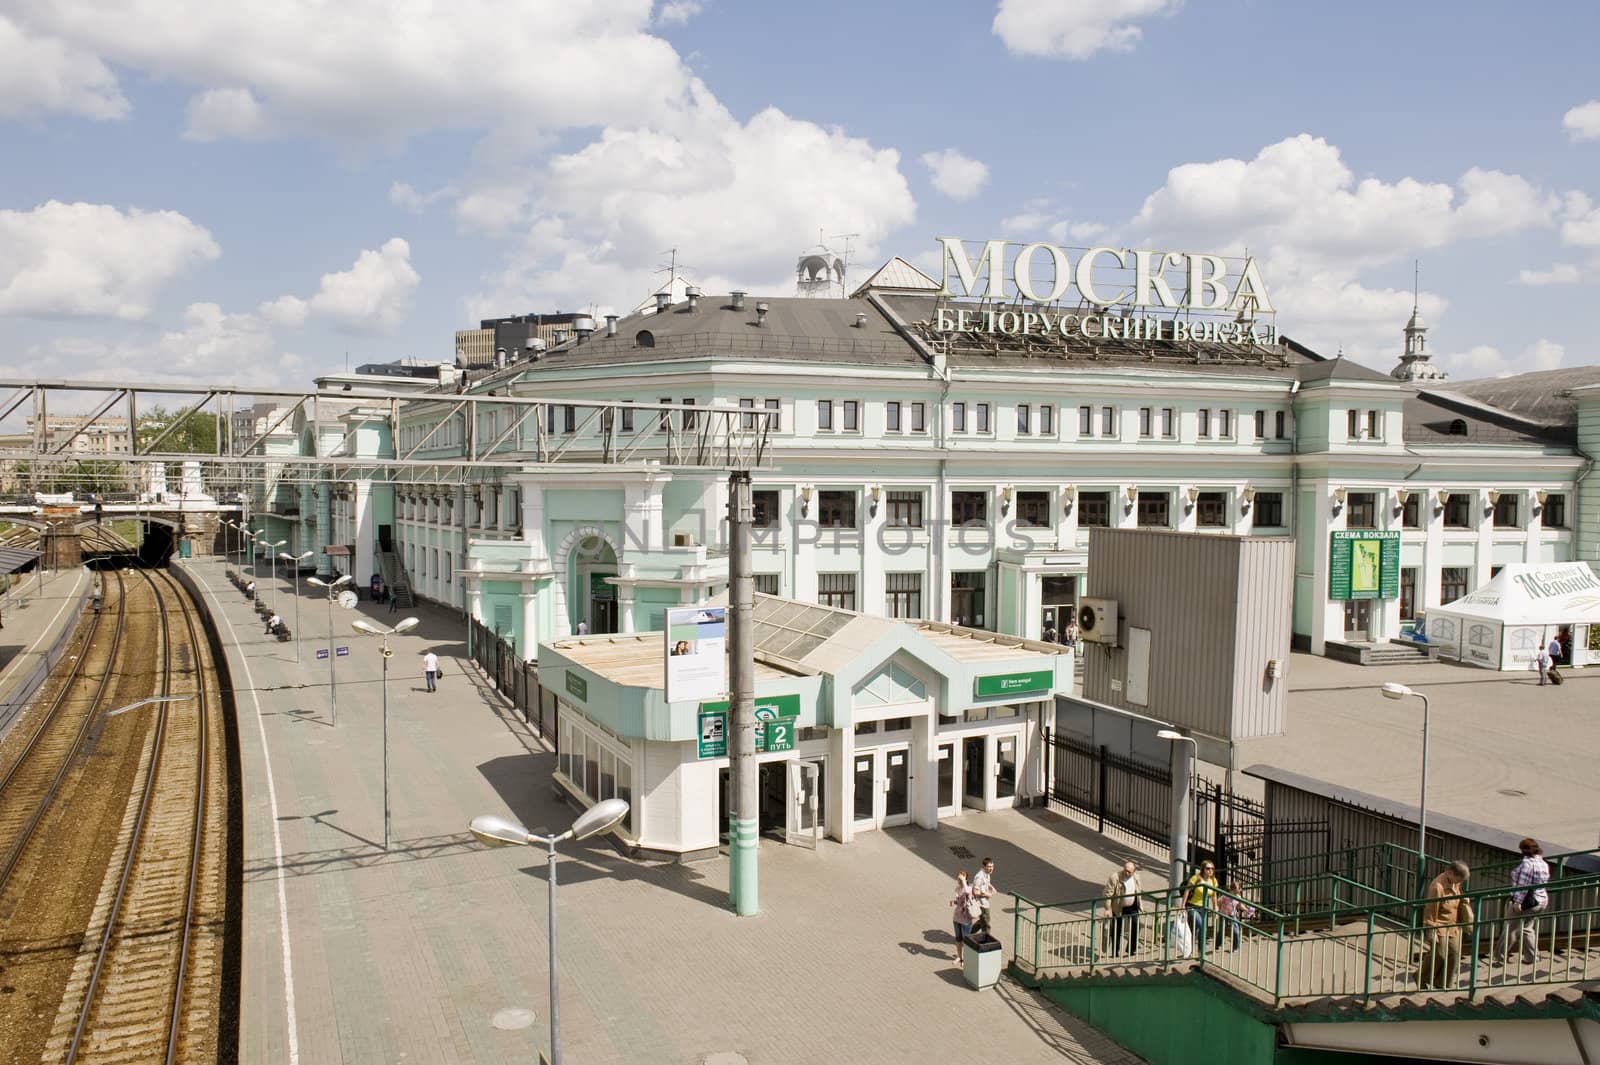 The Belorussian railway station in Moscow taken on May 2011